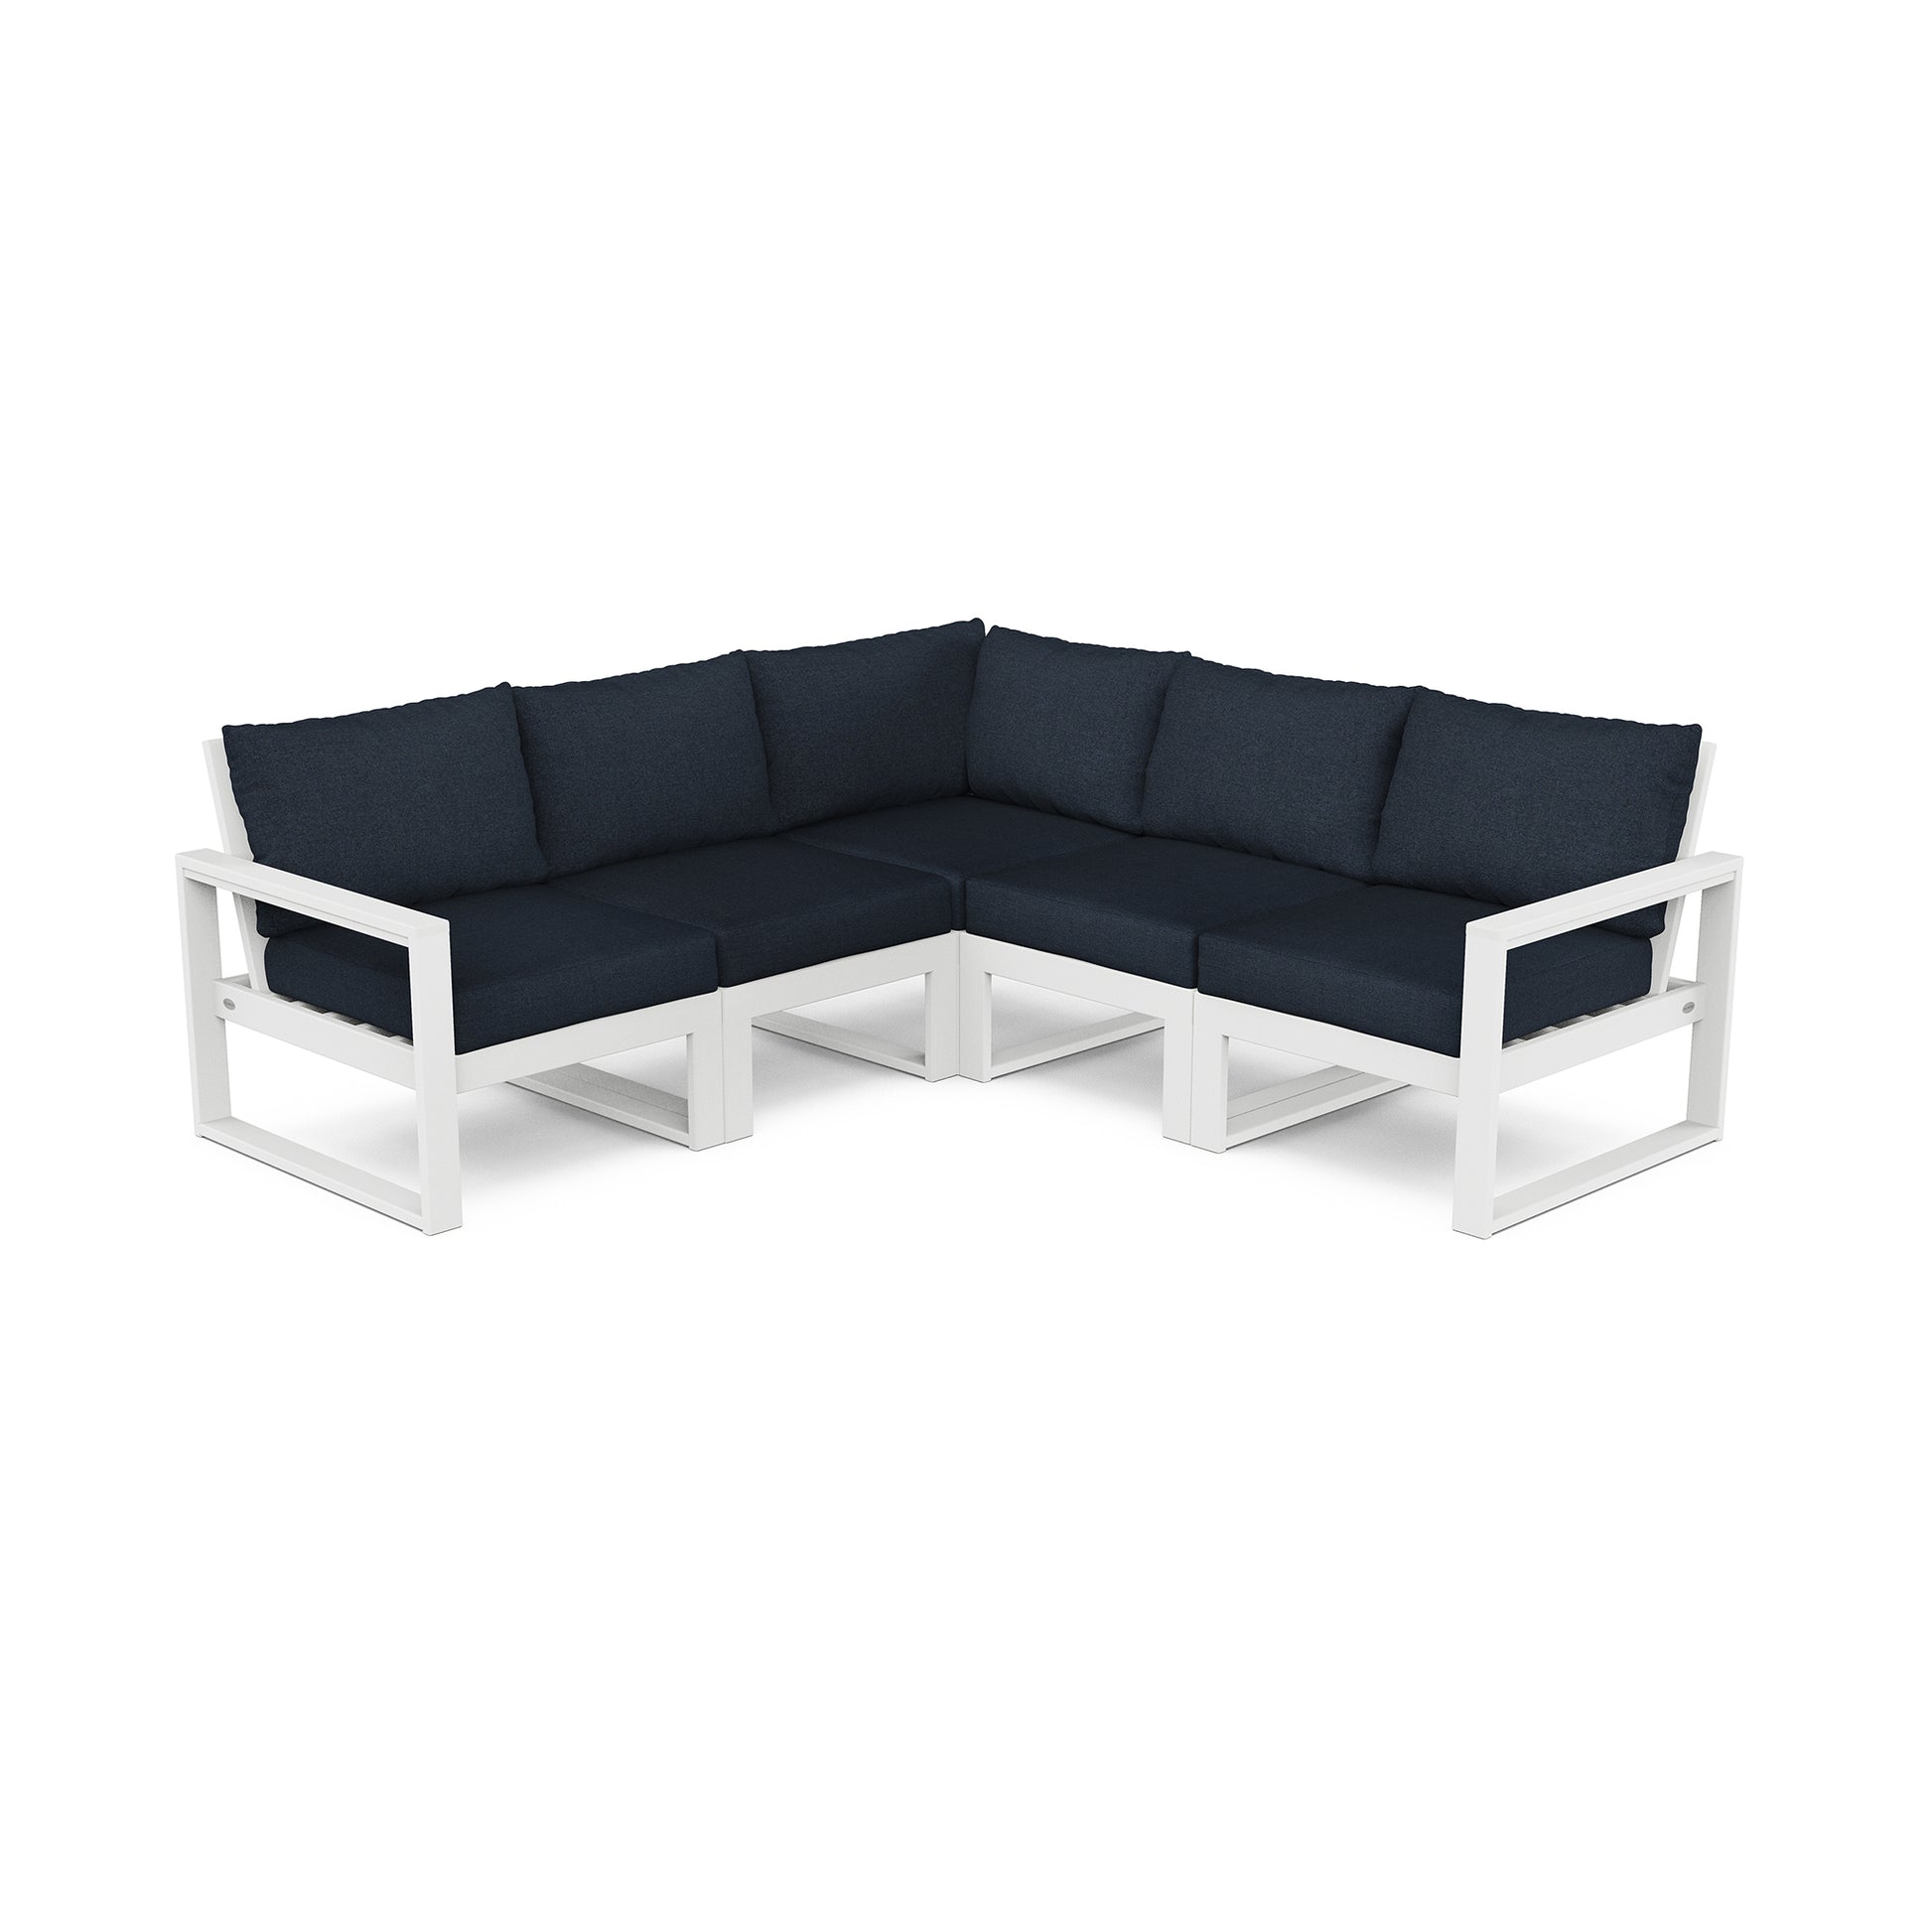 A modern POLYWOOD EDGE 5-Piece Modular Deep Seating Set with white frames and dark blue cushions, isolated on a white background.